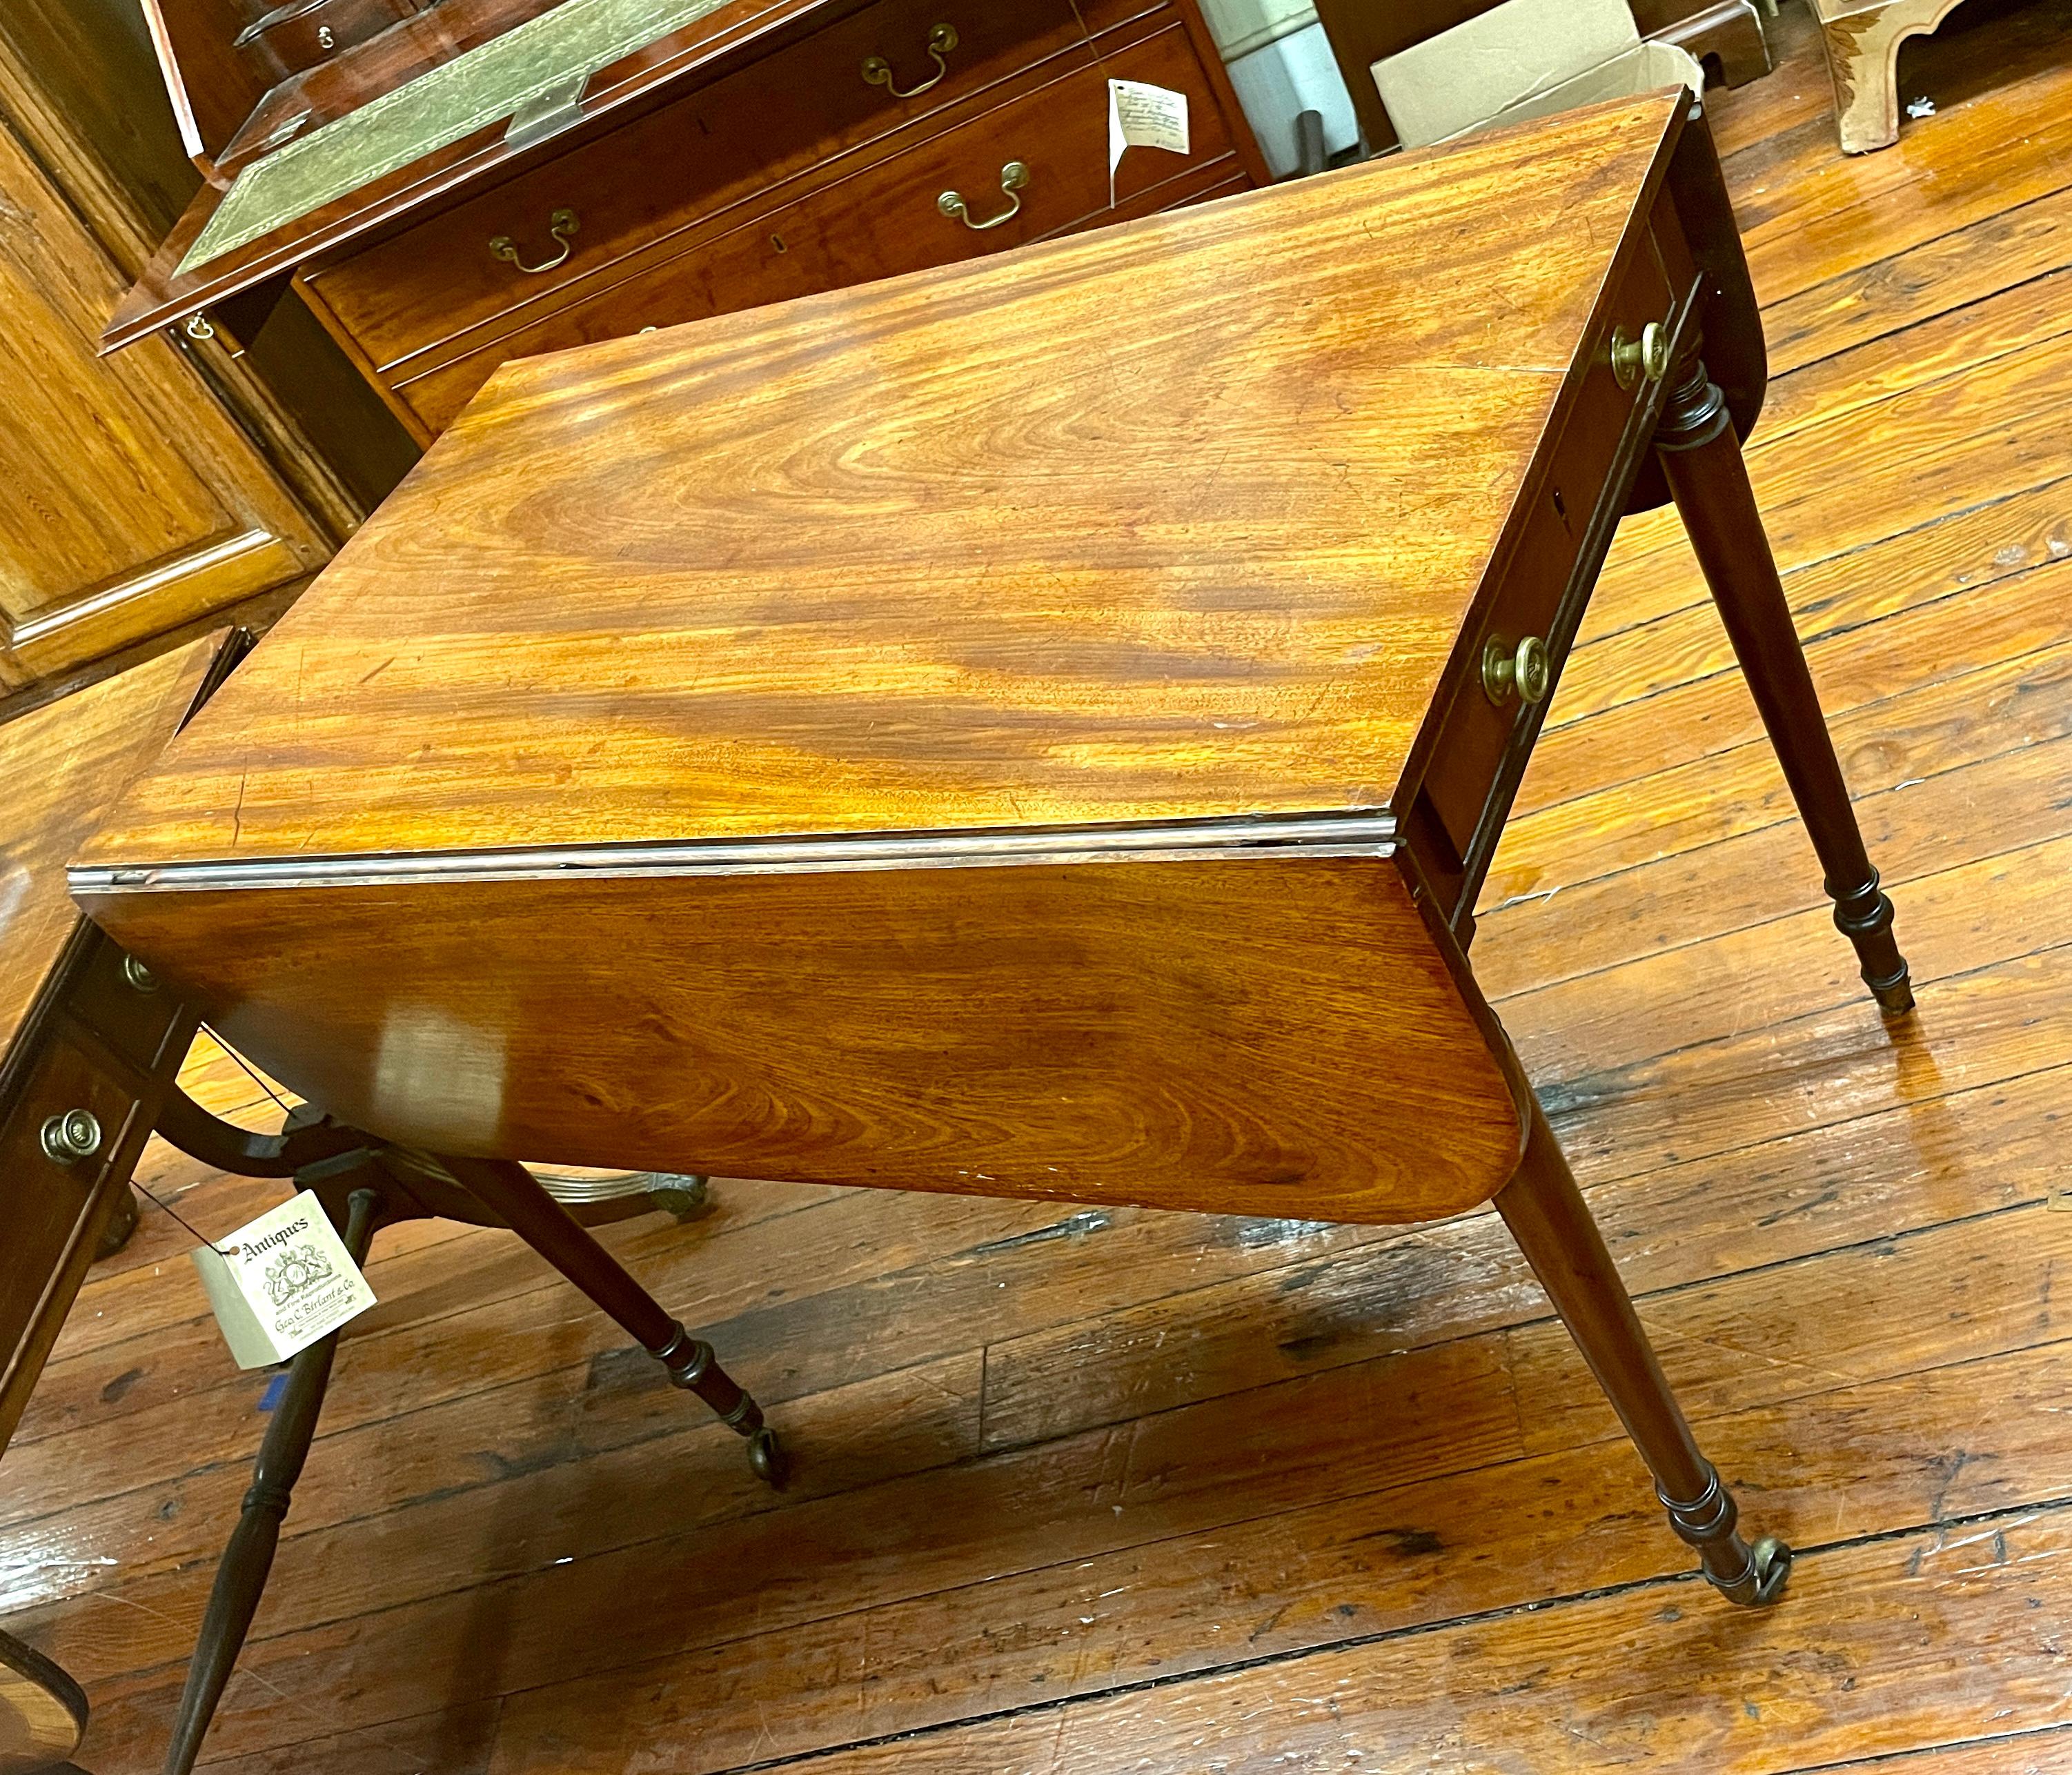 Fine quality antique English George III figured honey colored mahogany Sheraton style drop-leaf Pembroke table. The patinated honey-colour has been lovingly acquired over the past 200 years. Superb highly figured mahogany. Original brass casters.